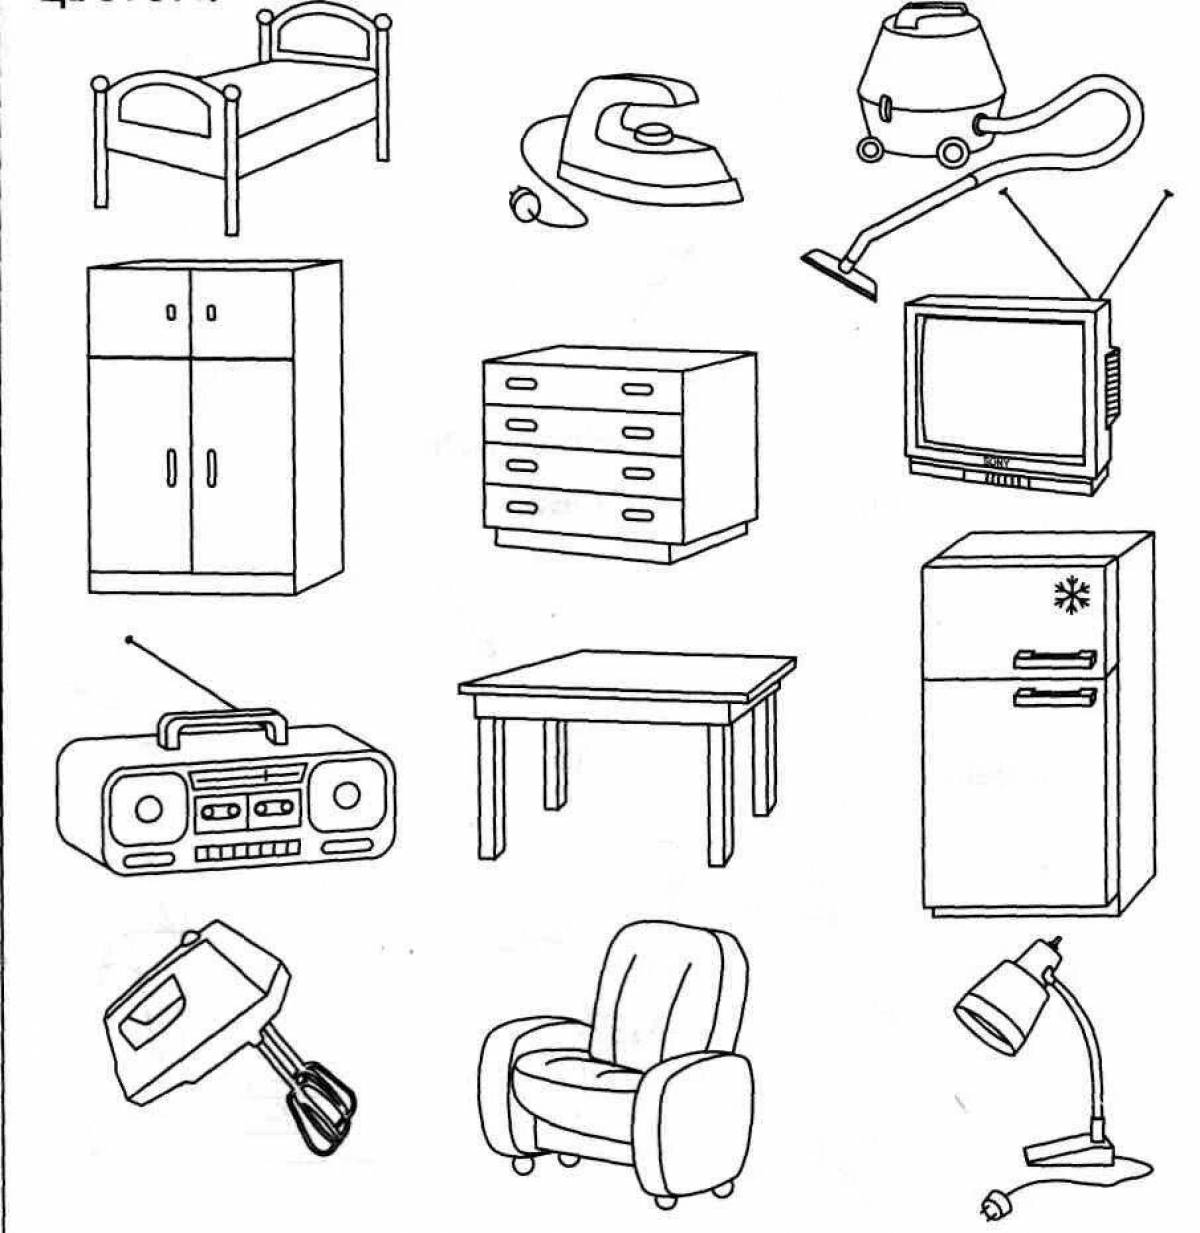 Colourful coloring pages of household appliances for children 6-7 years old